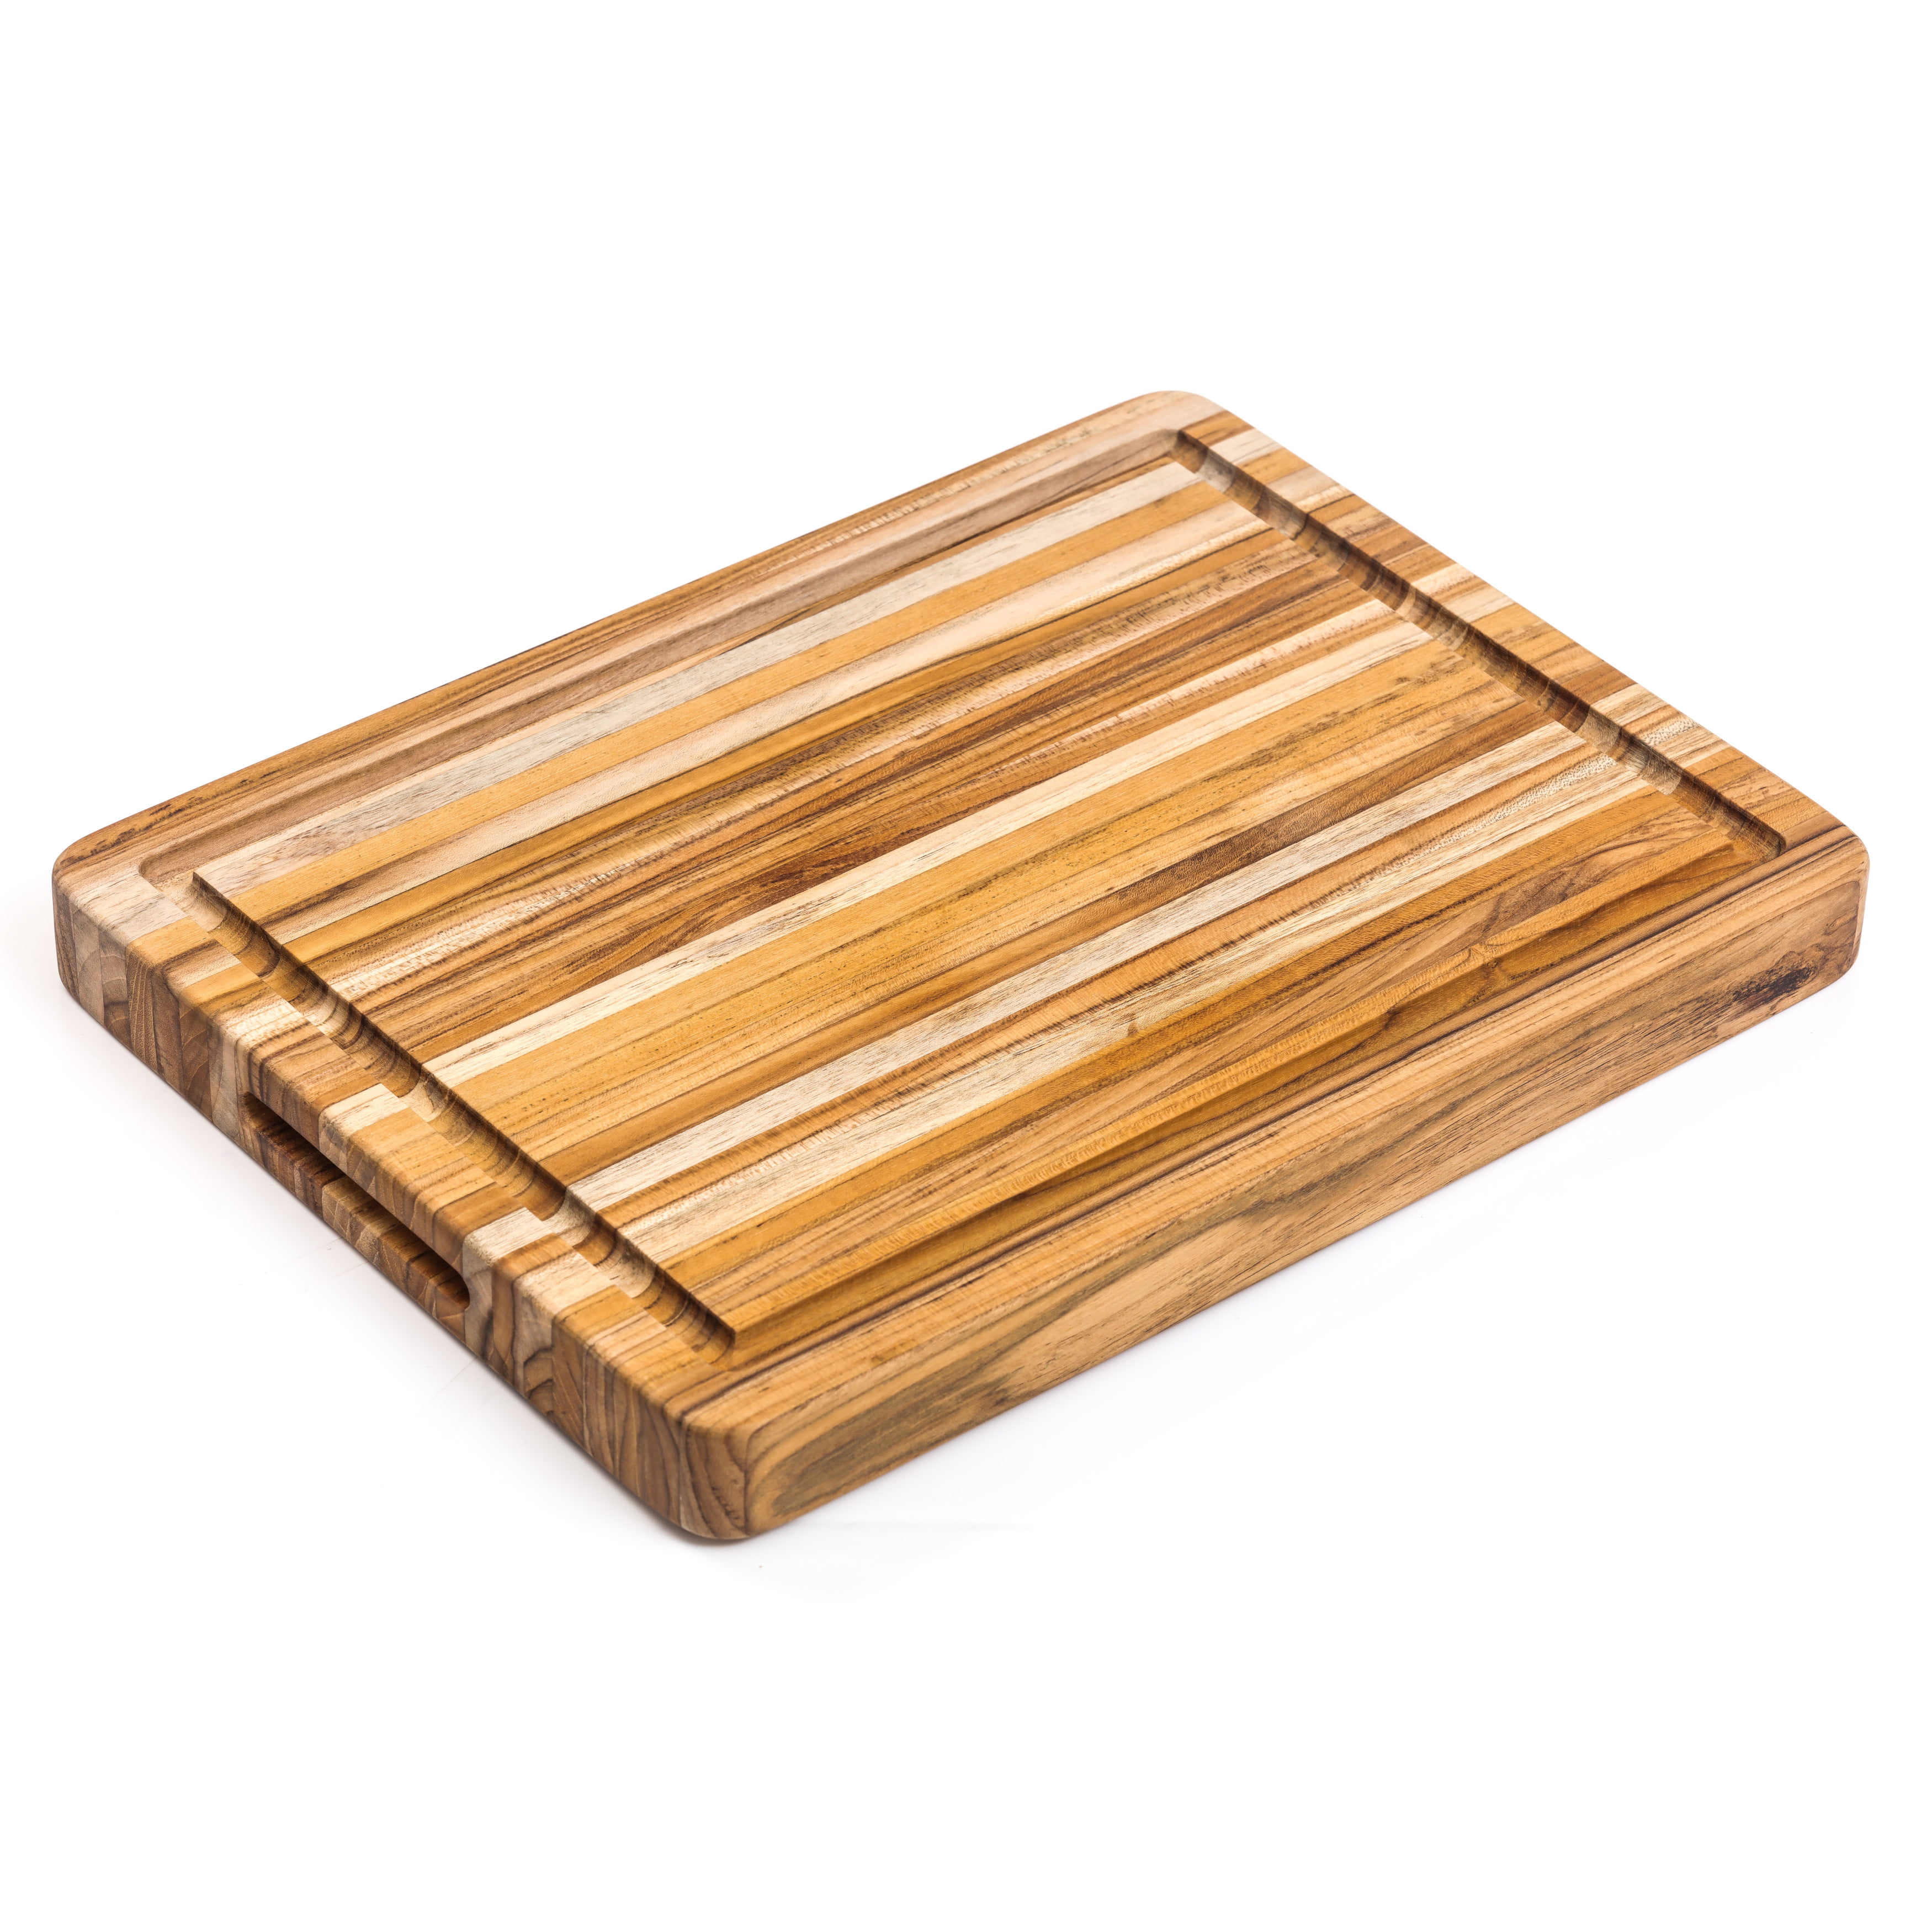 XL Professional Bamboo Chopping Serving Board Handle and Utensils Was £29.99 